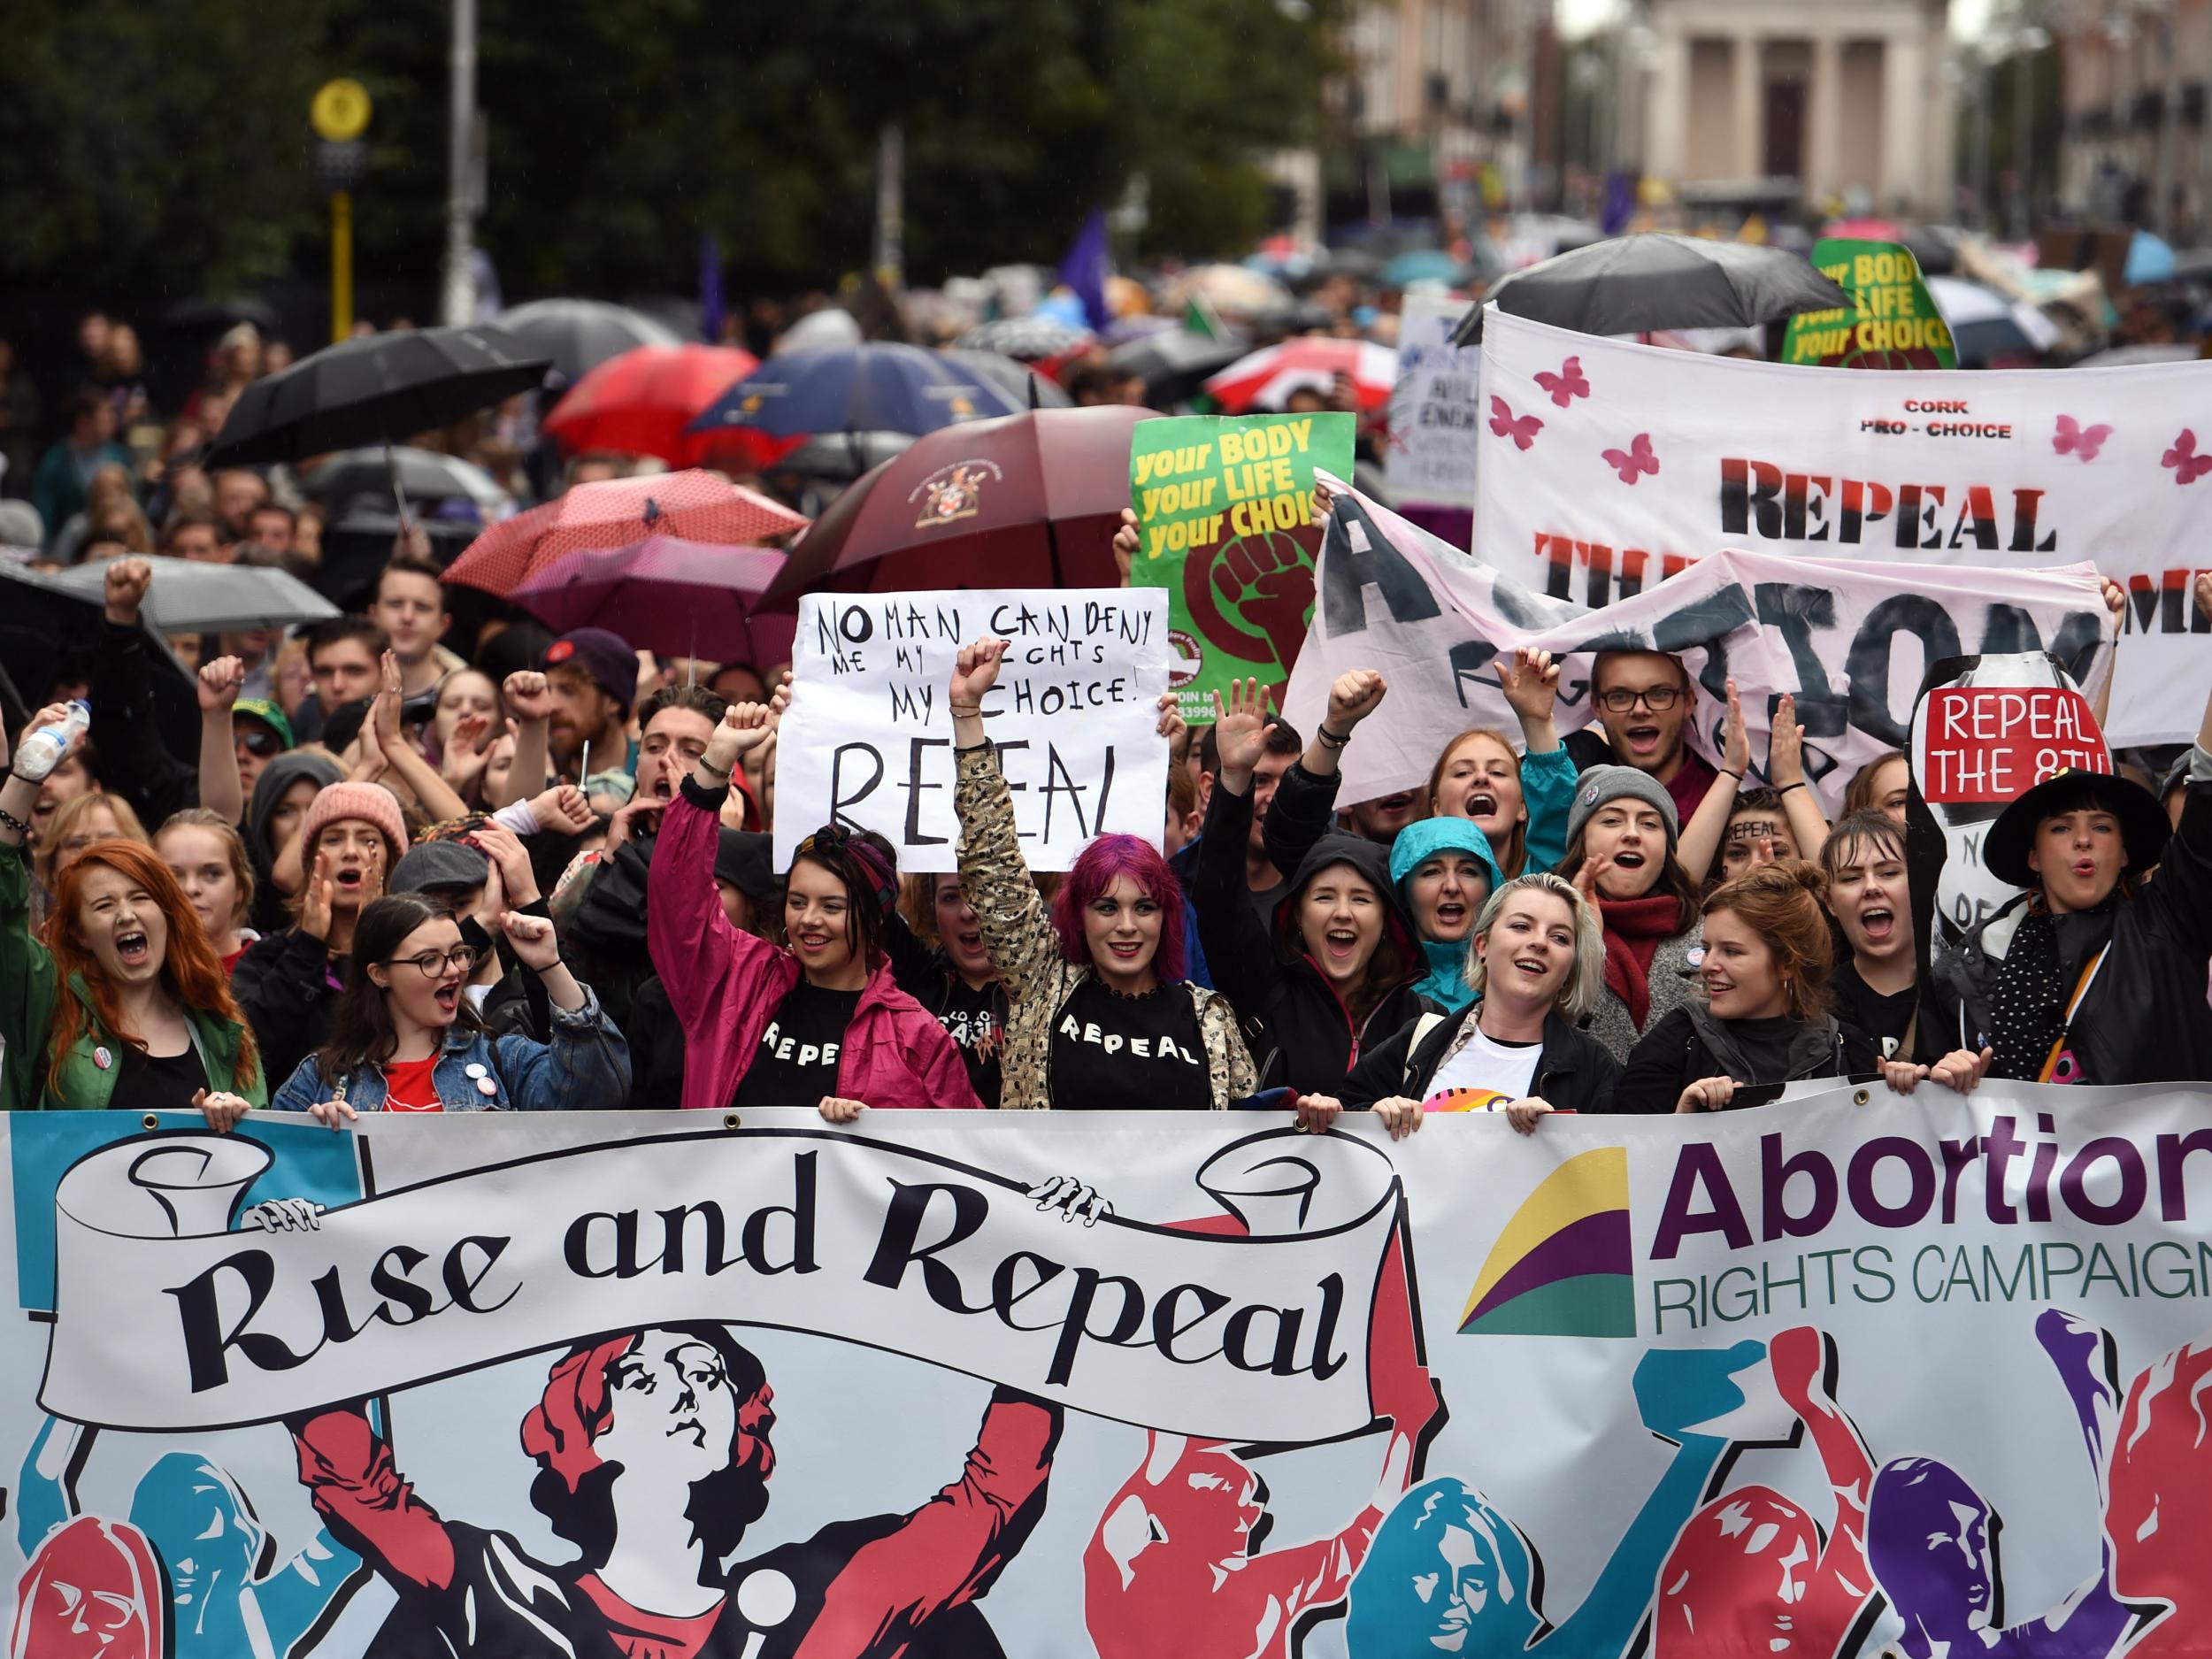 Demonstrators urge the Irish Government to repeal the 8th amendment to the constitution, which enforces strict limitations to a woman's right to an abortion, in Dublin last September